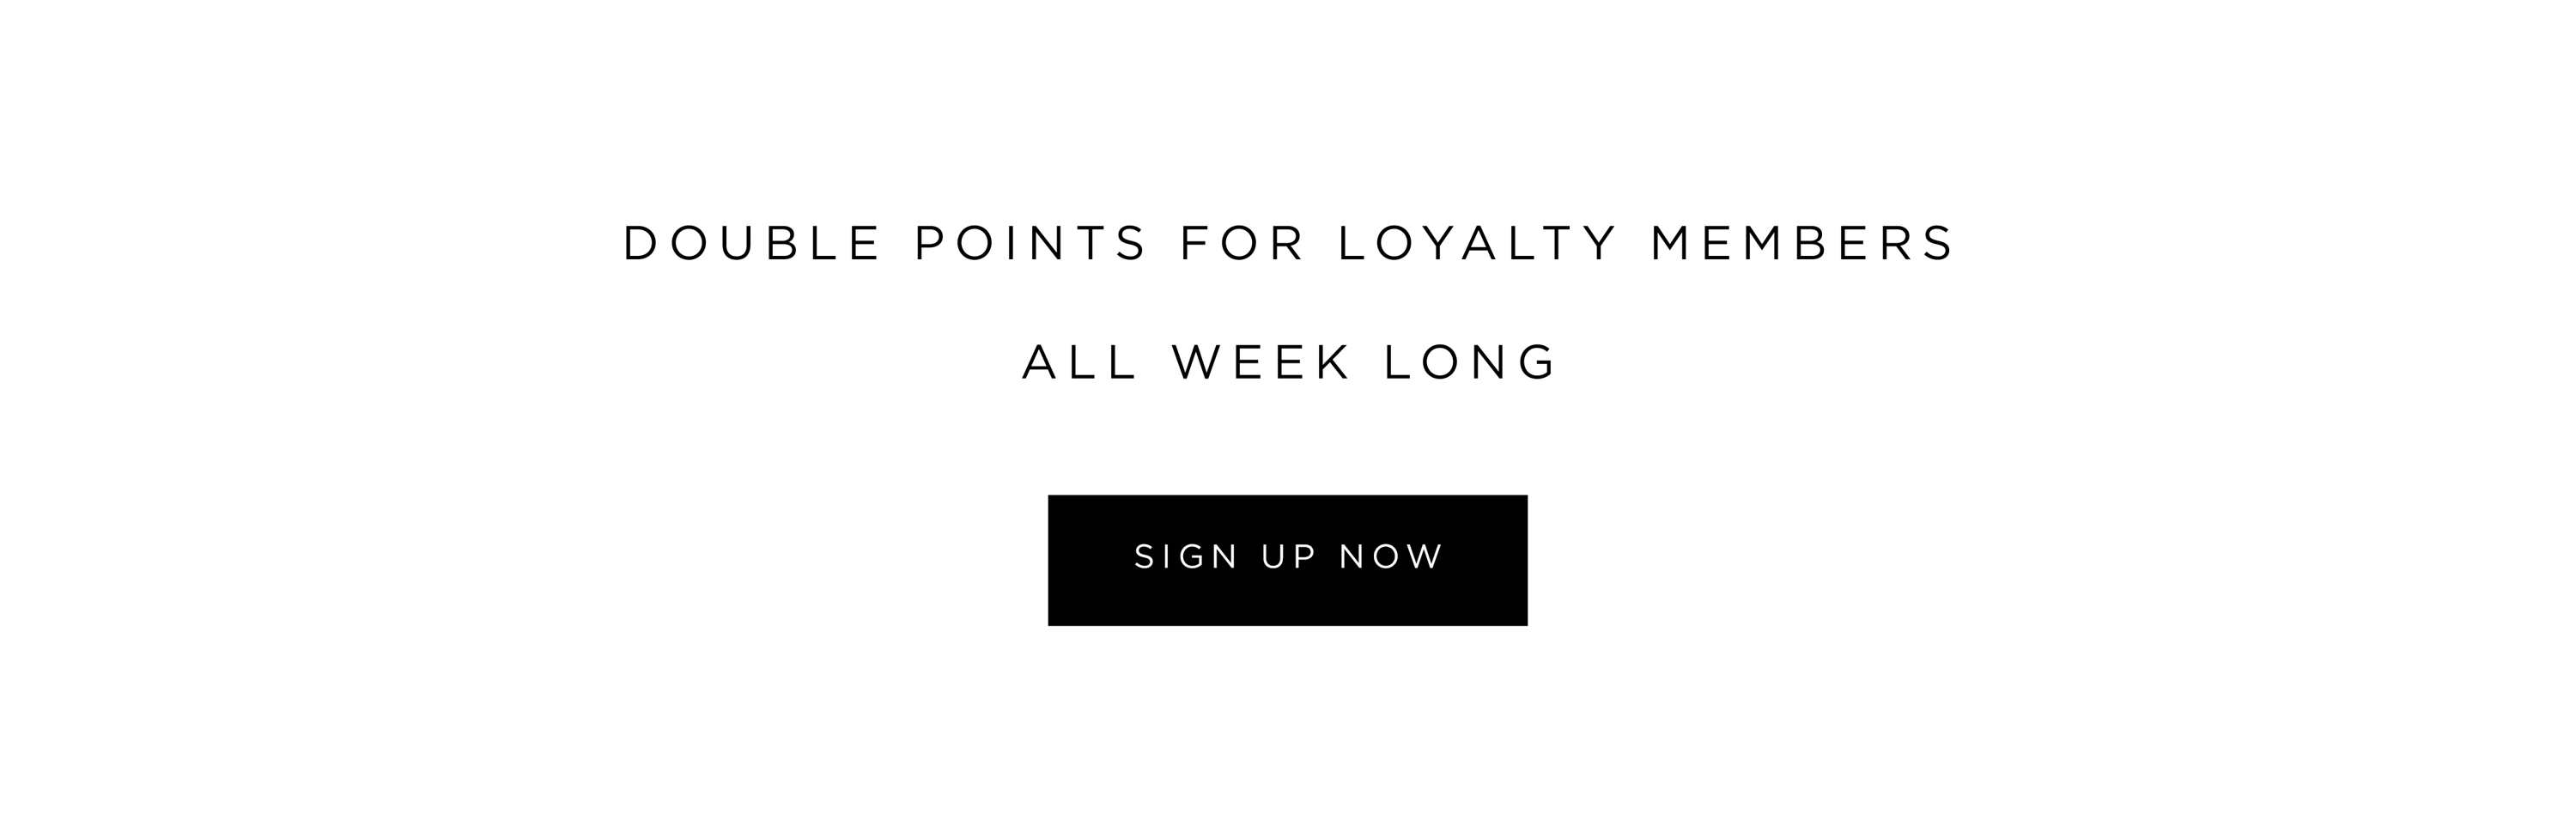 Double points for loyalty members all week long. SING UP NOW. 